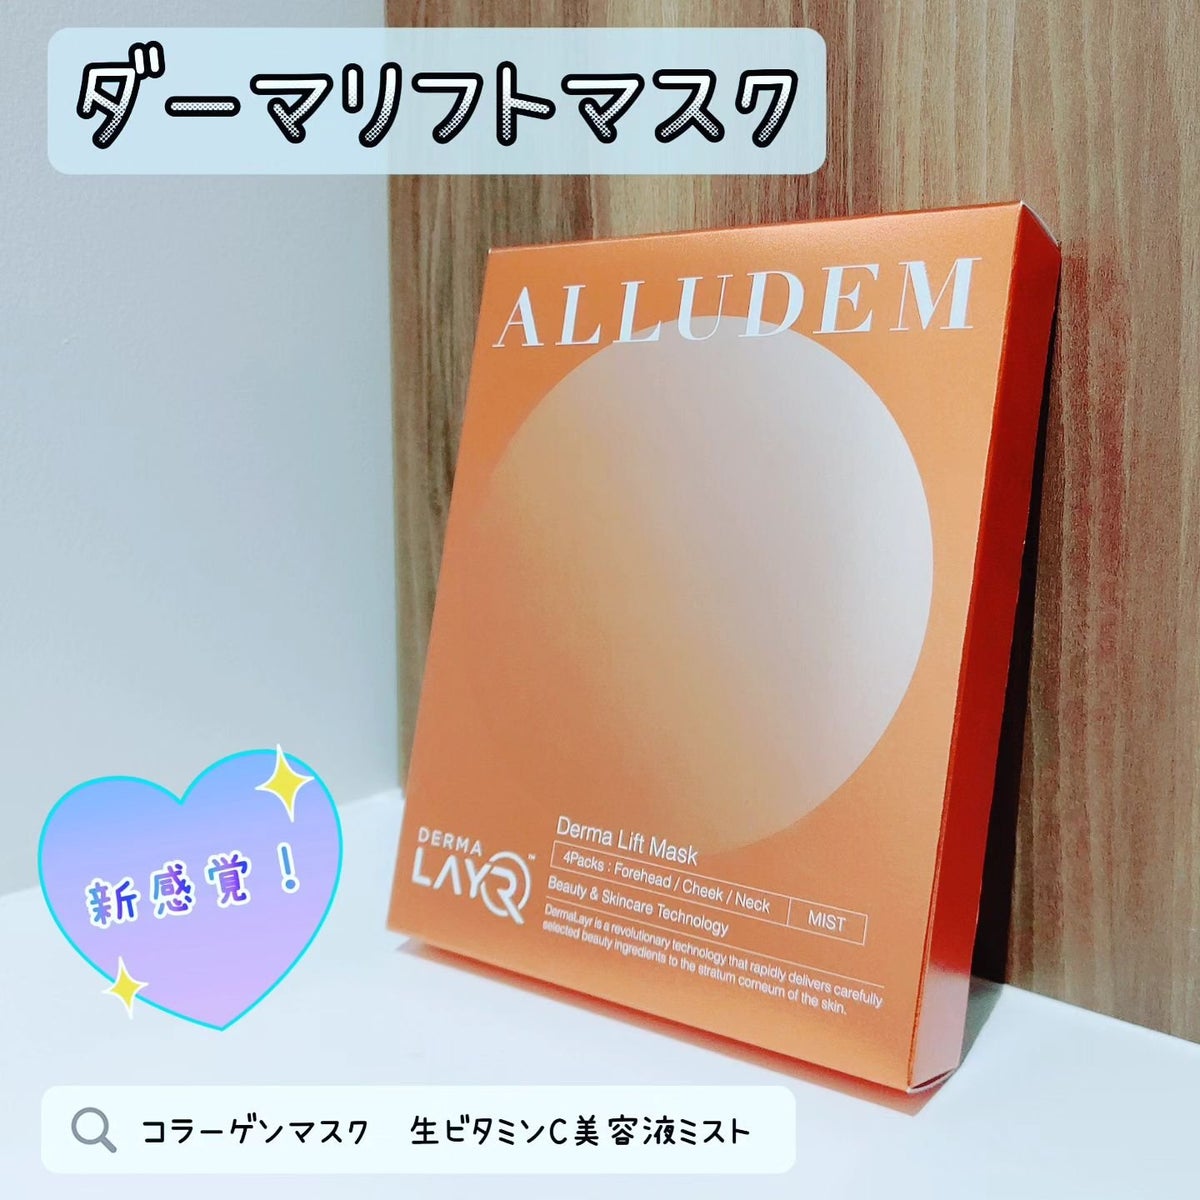 ALLUDEM Derma Lift Mask ダーマリフト - 洗顔グッズ